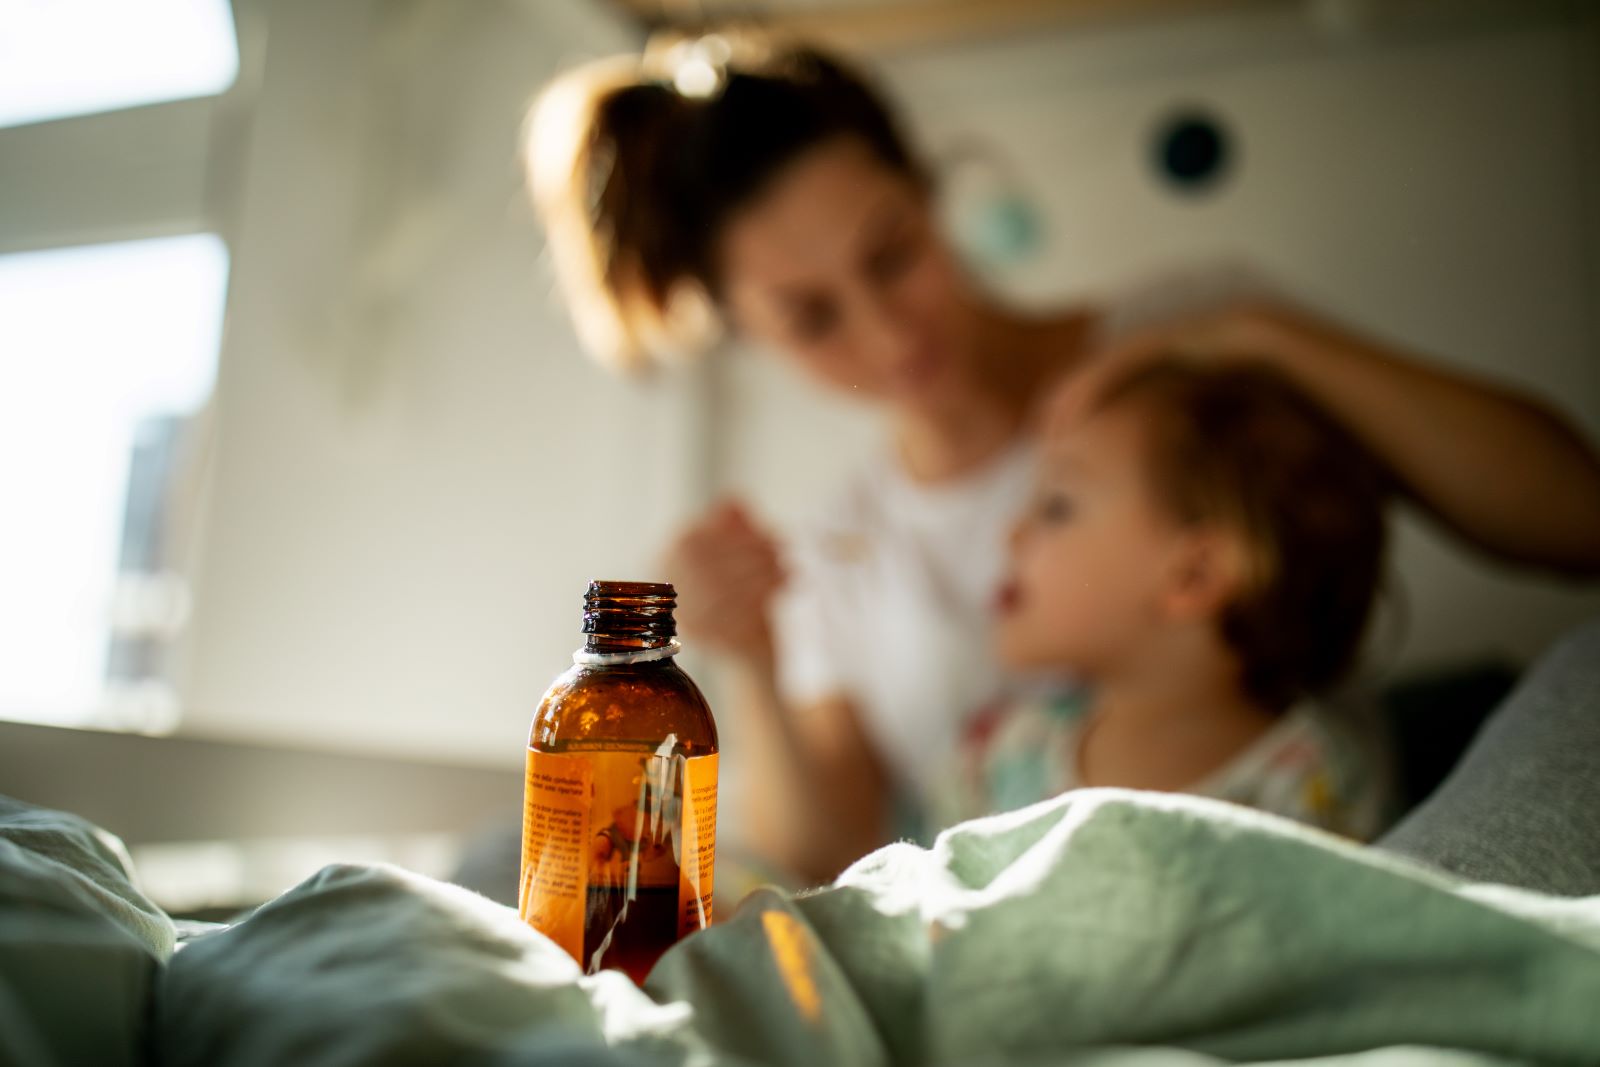 Can't Find Children's Medicine? 4 Tips From a Pediatrician for Treating Your Sick Child